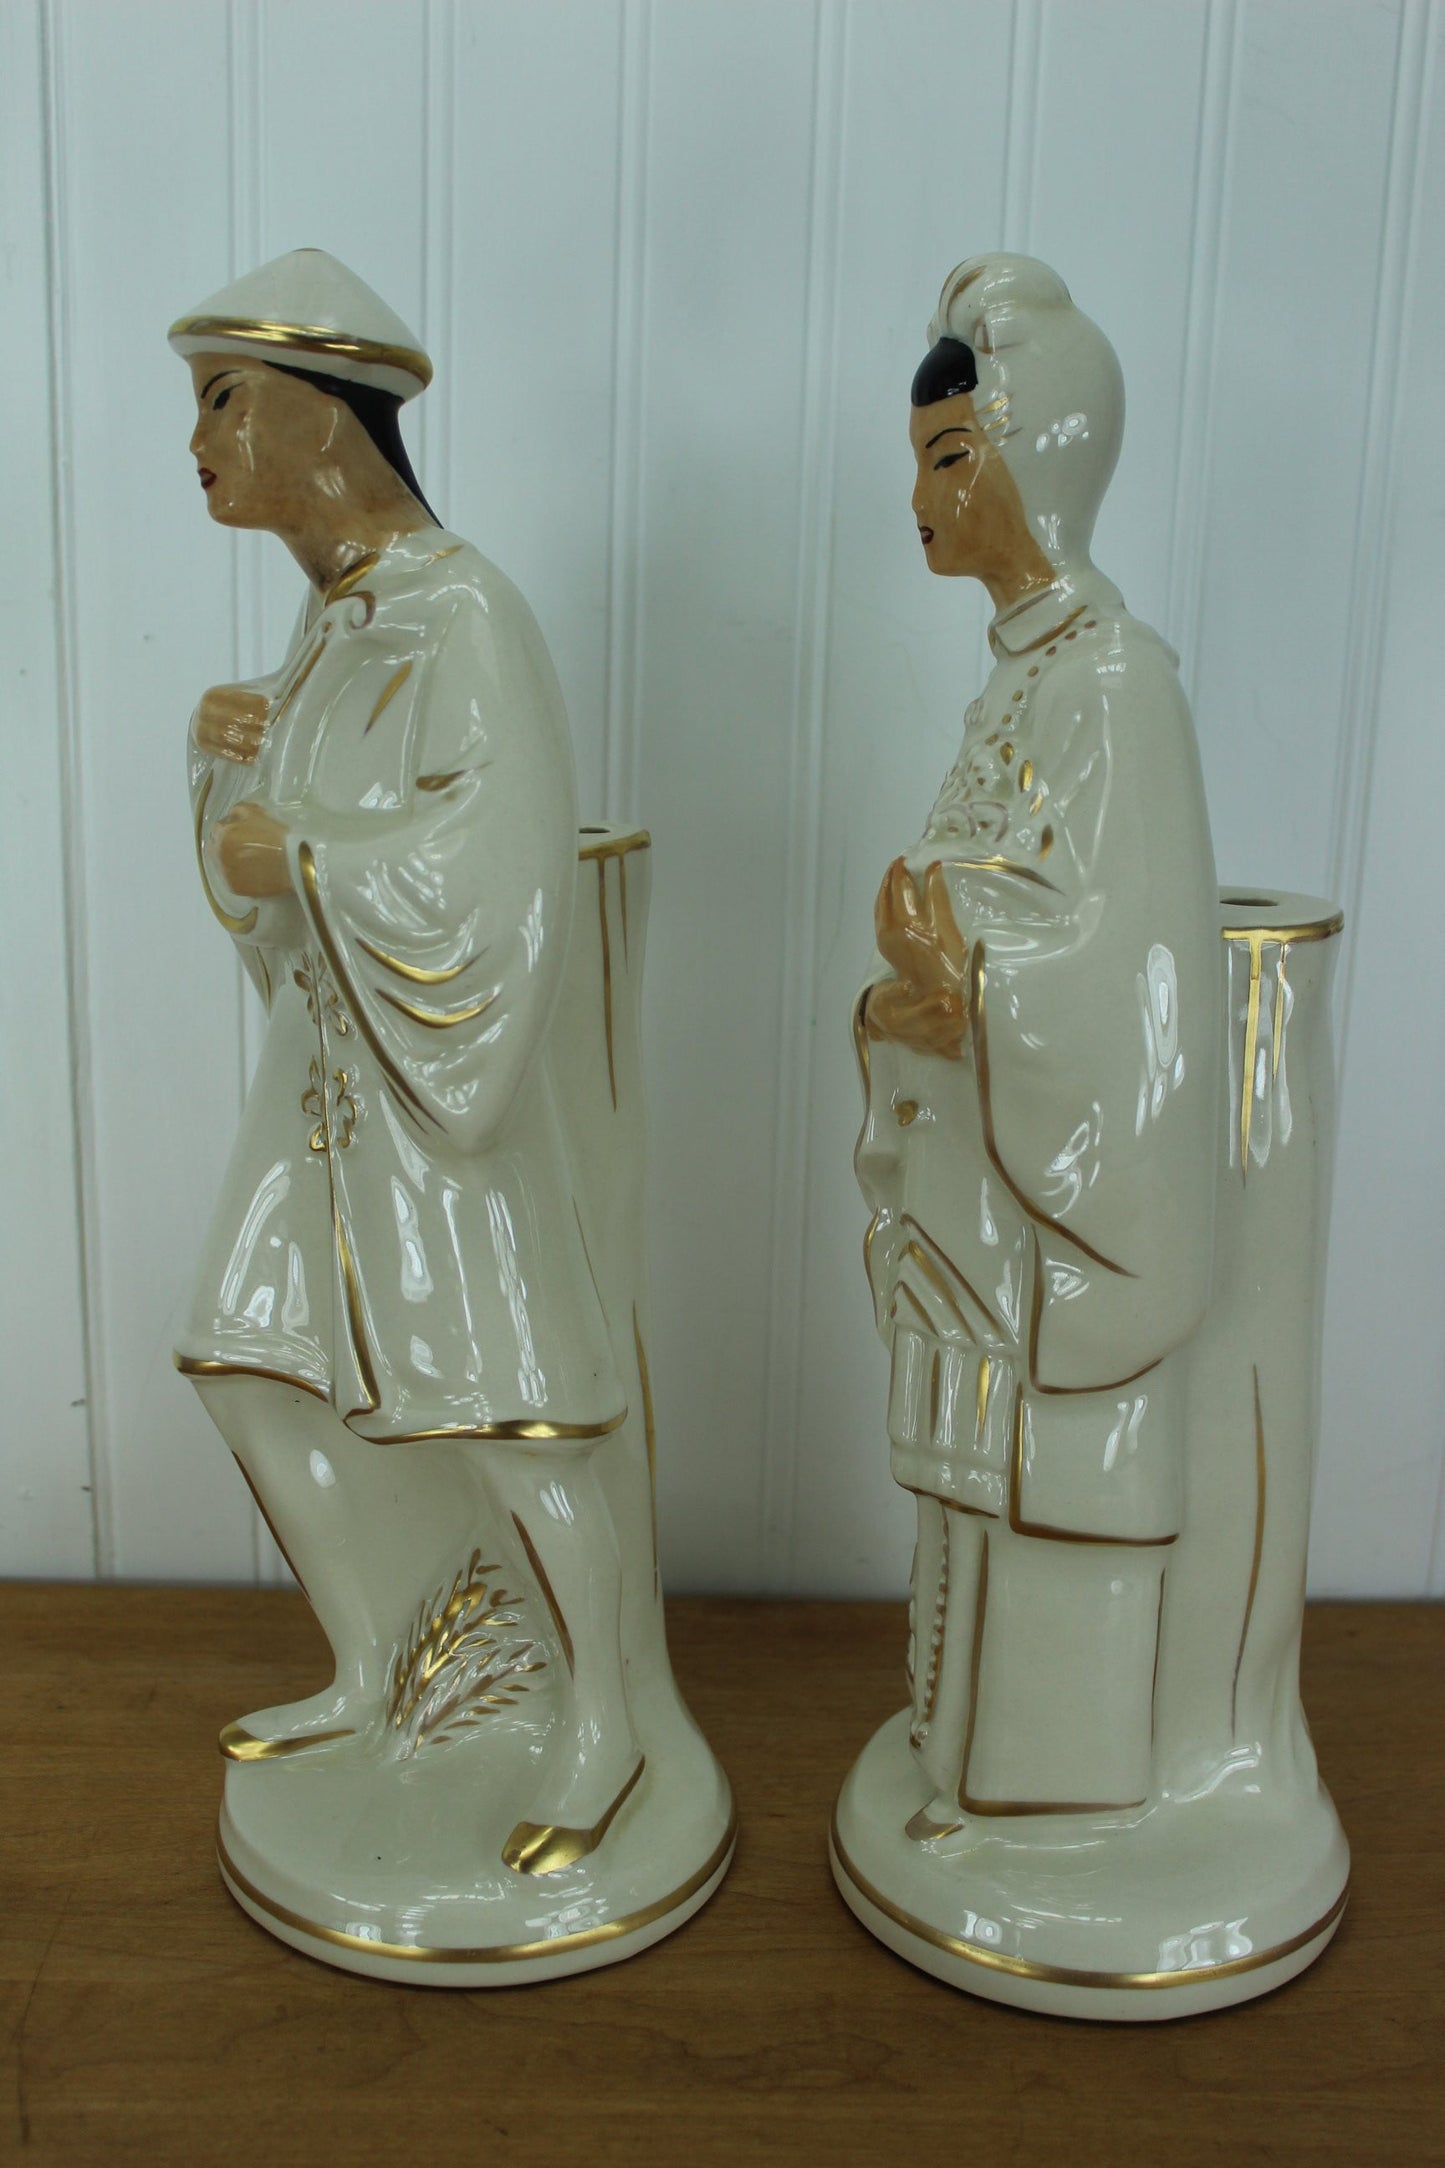 Vintage Mid Century Asian Figures - Lamp Bases - Tall 14 1/2" - White Heavy Gilt pair male and female